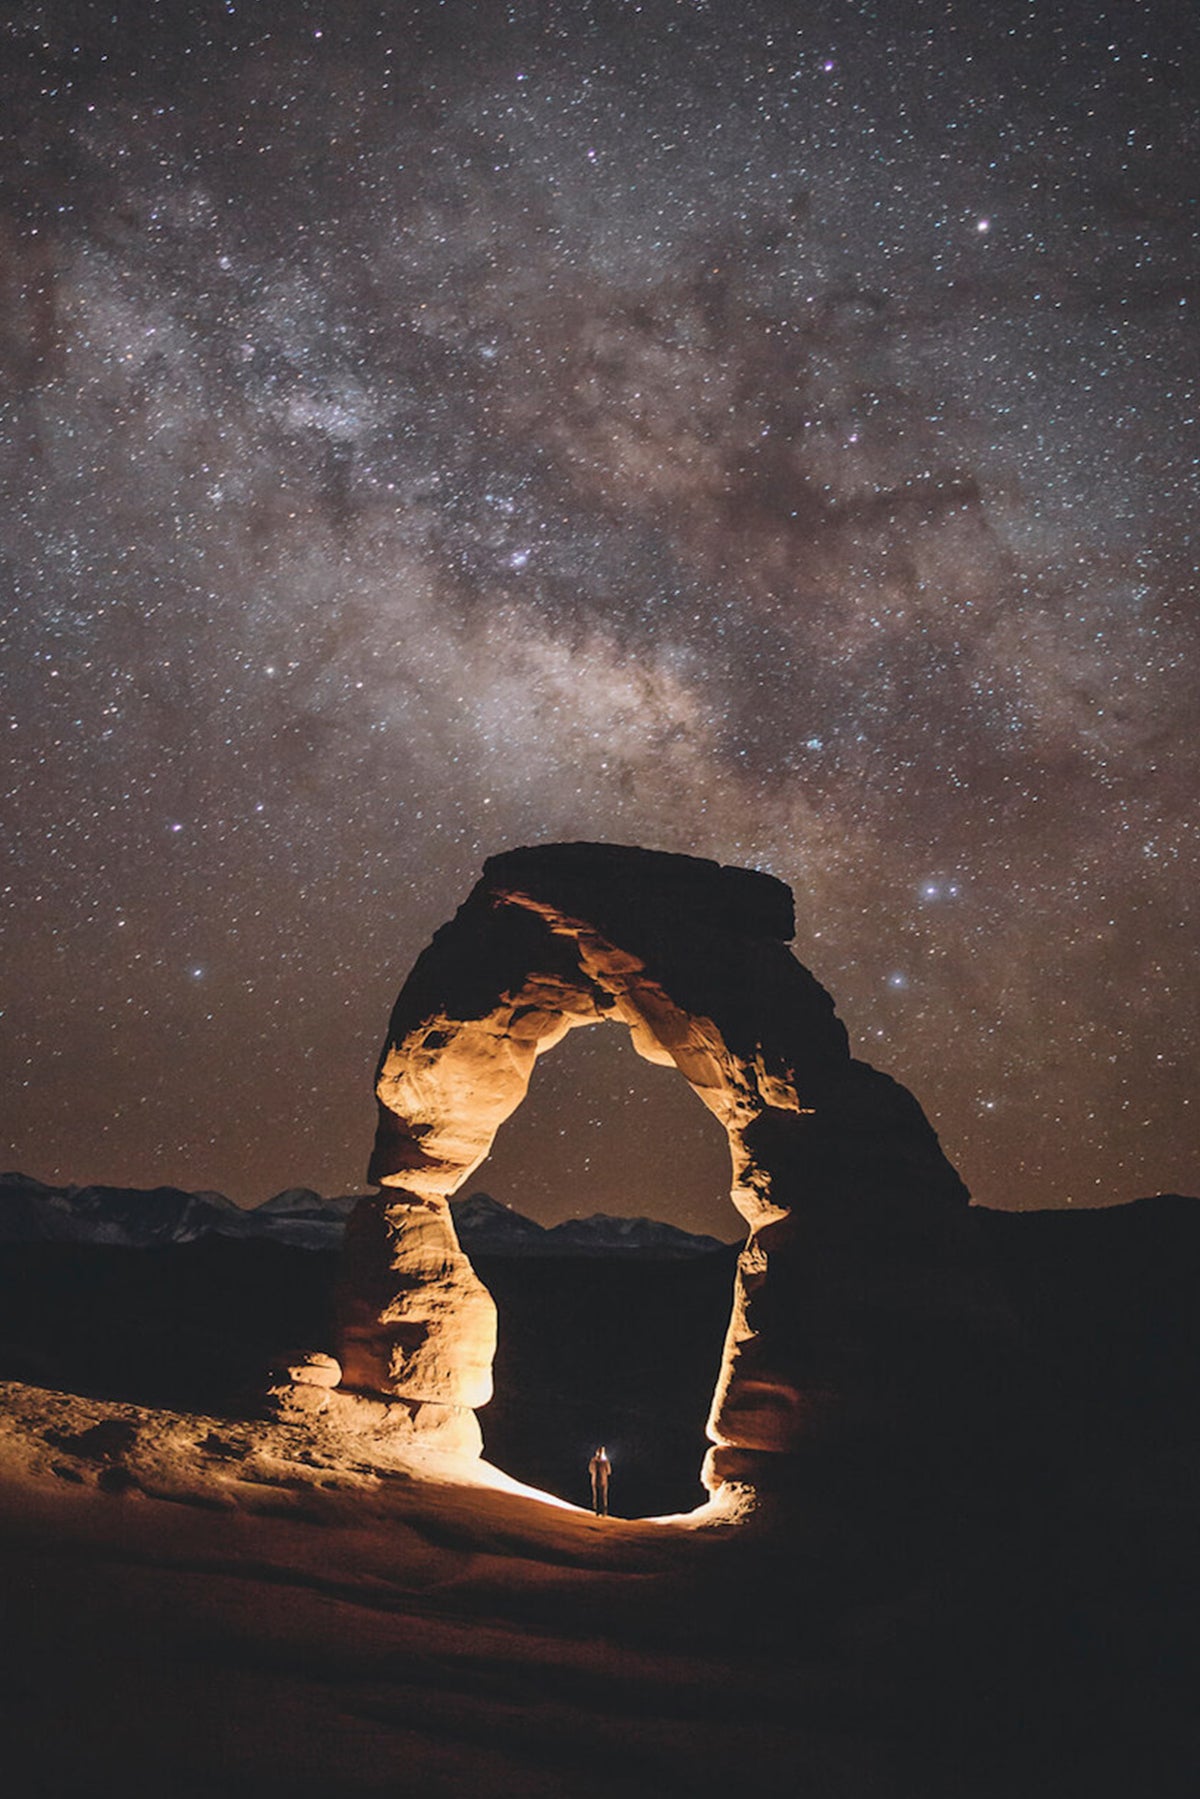 Photo by Garrett King of solitary arch under starry night sky